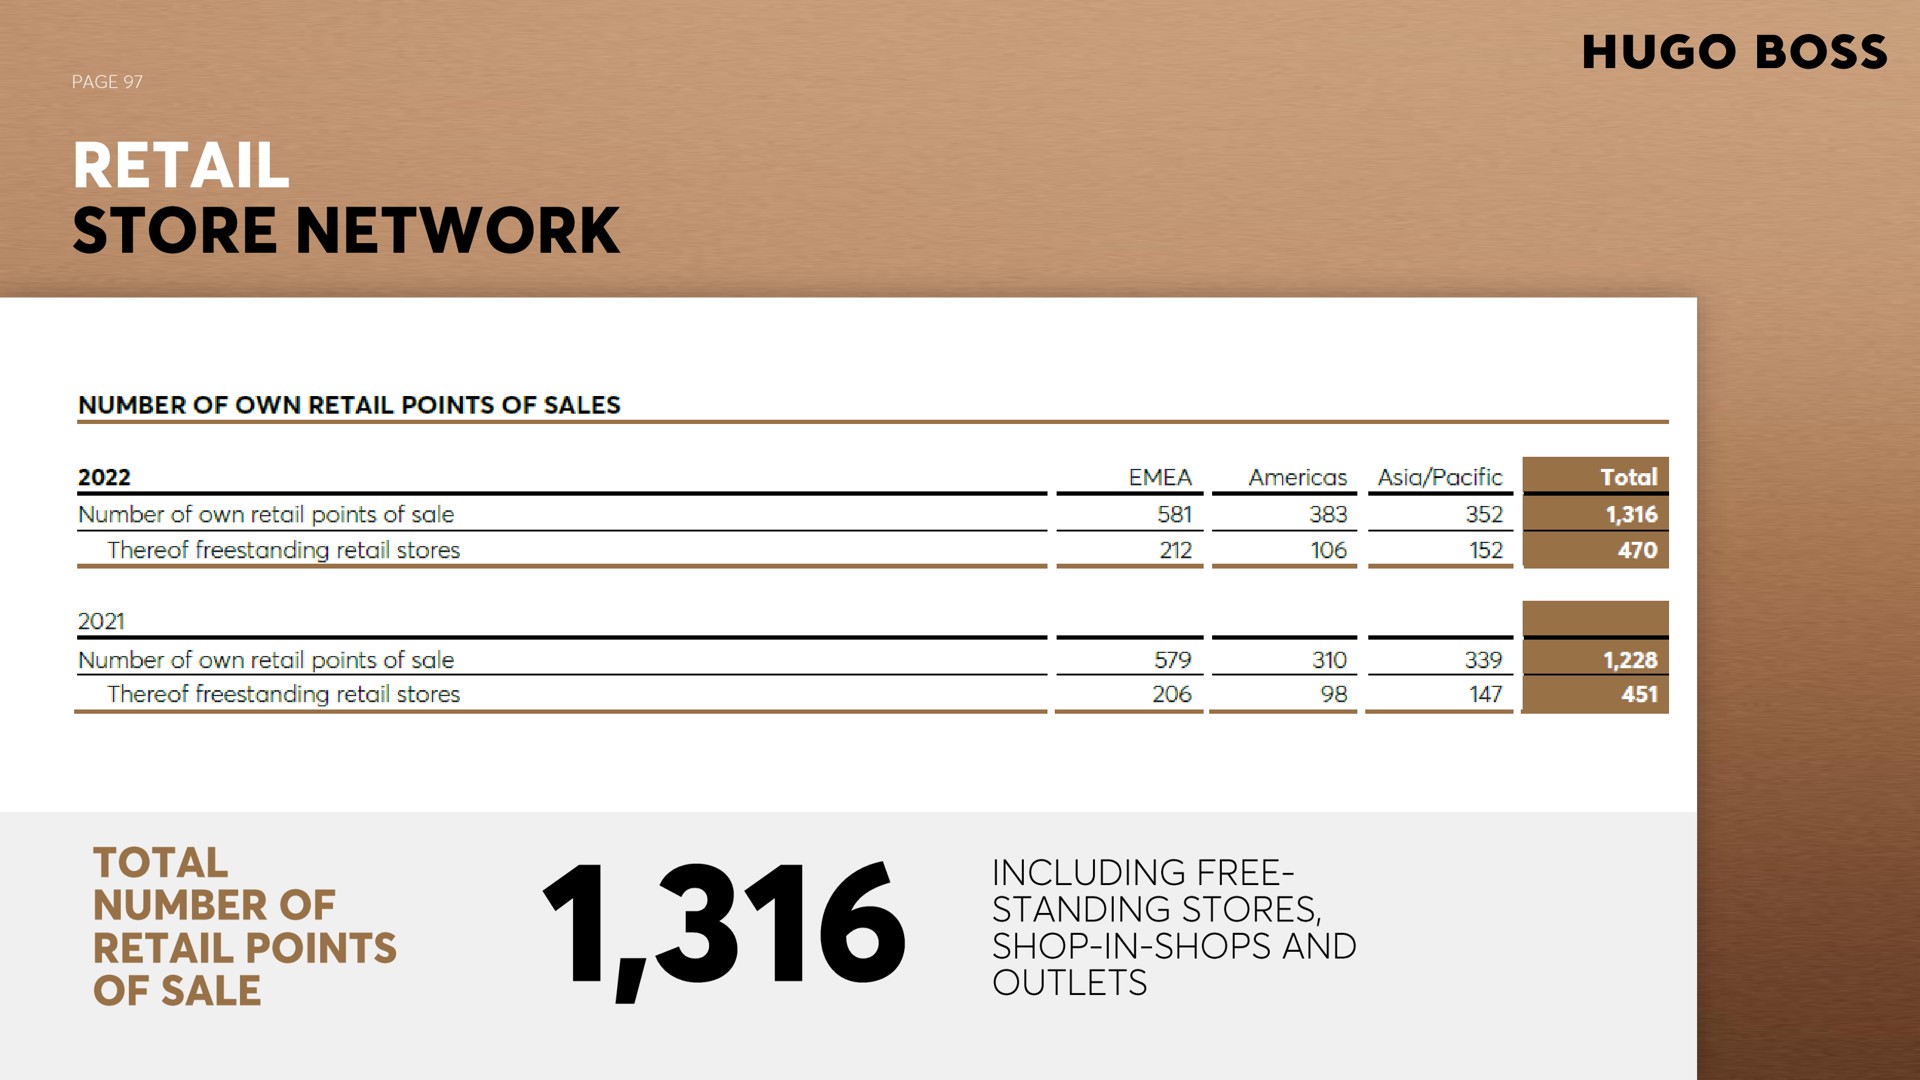 total number of retail points of sale including free standing stores shop in shops and outlets | Hugo Boss